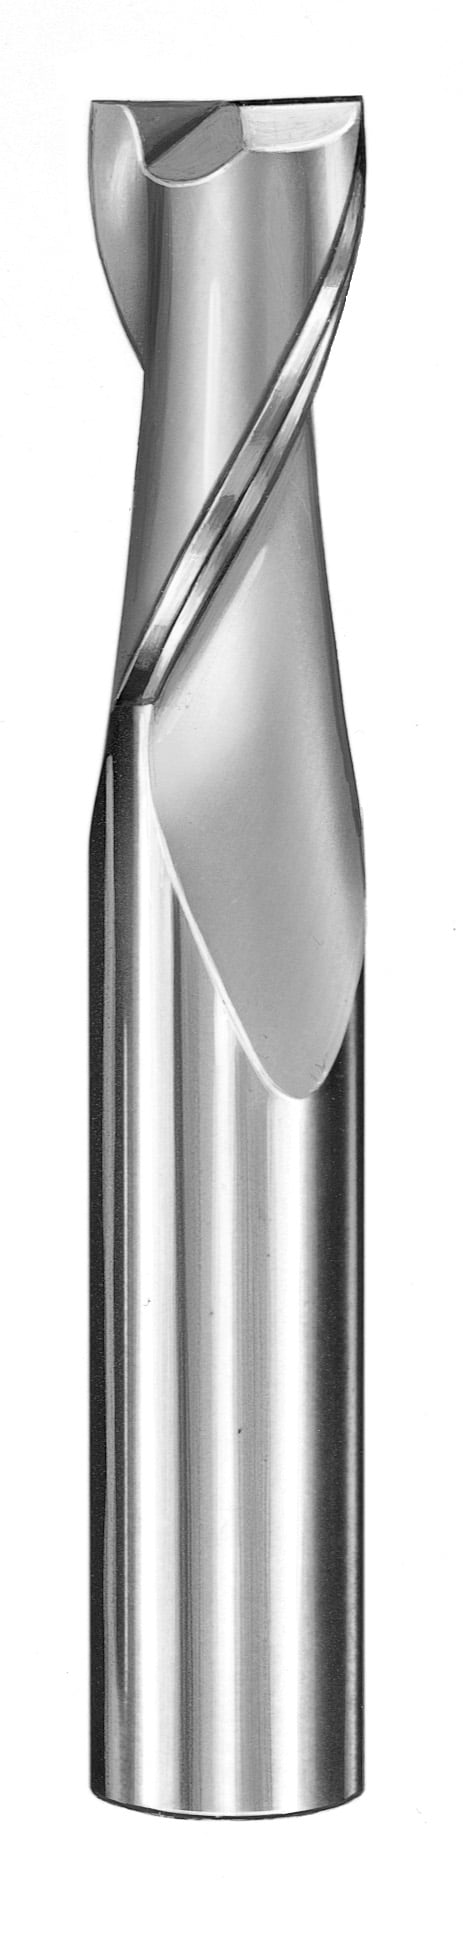 1/8" Dia, 2 Flute, Square End End Mill - 91270